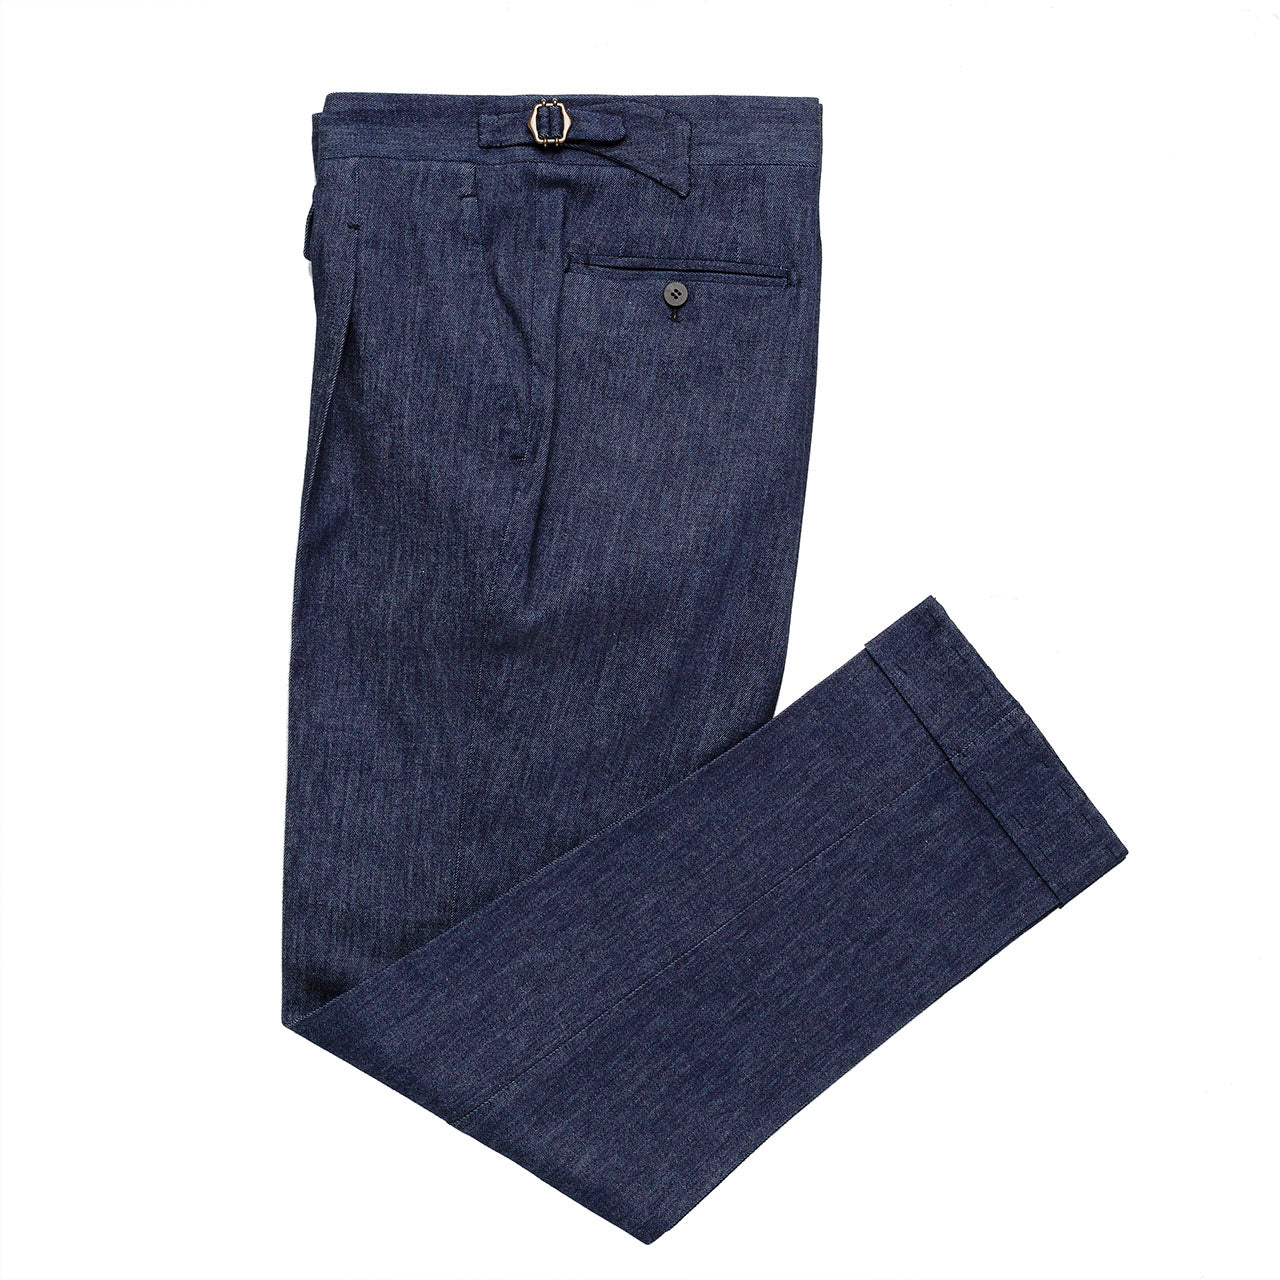 Navy Cargo Pants  Luciano Fashion Limited